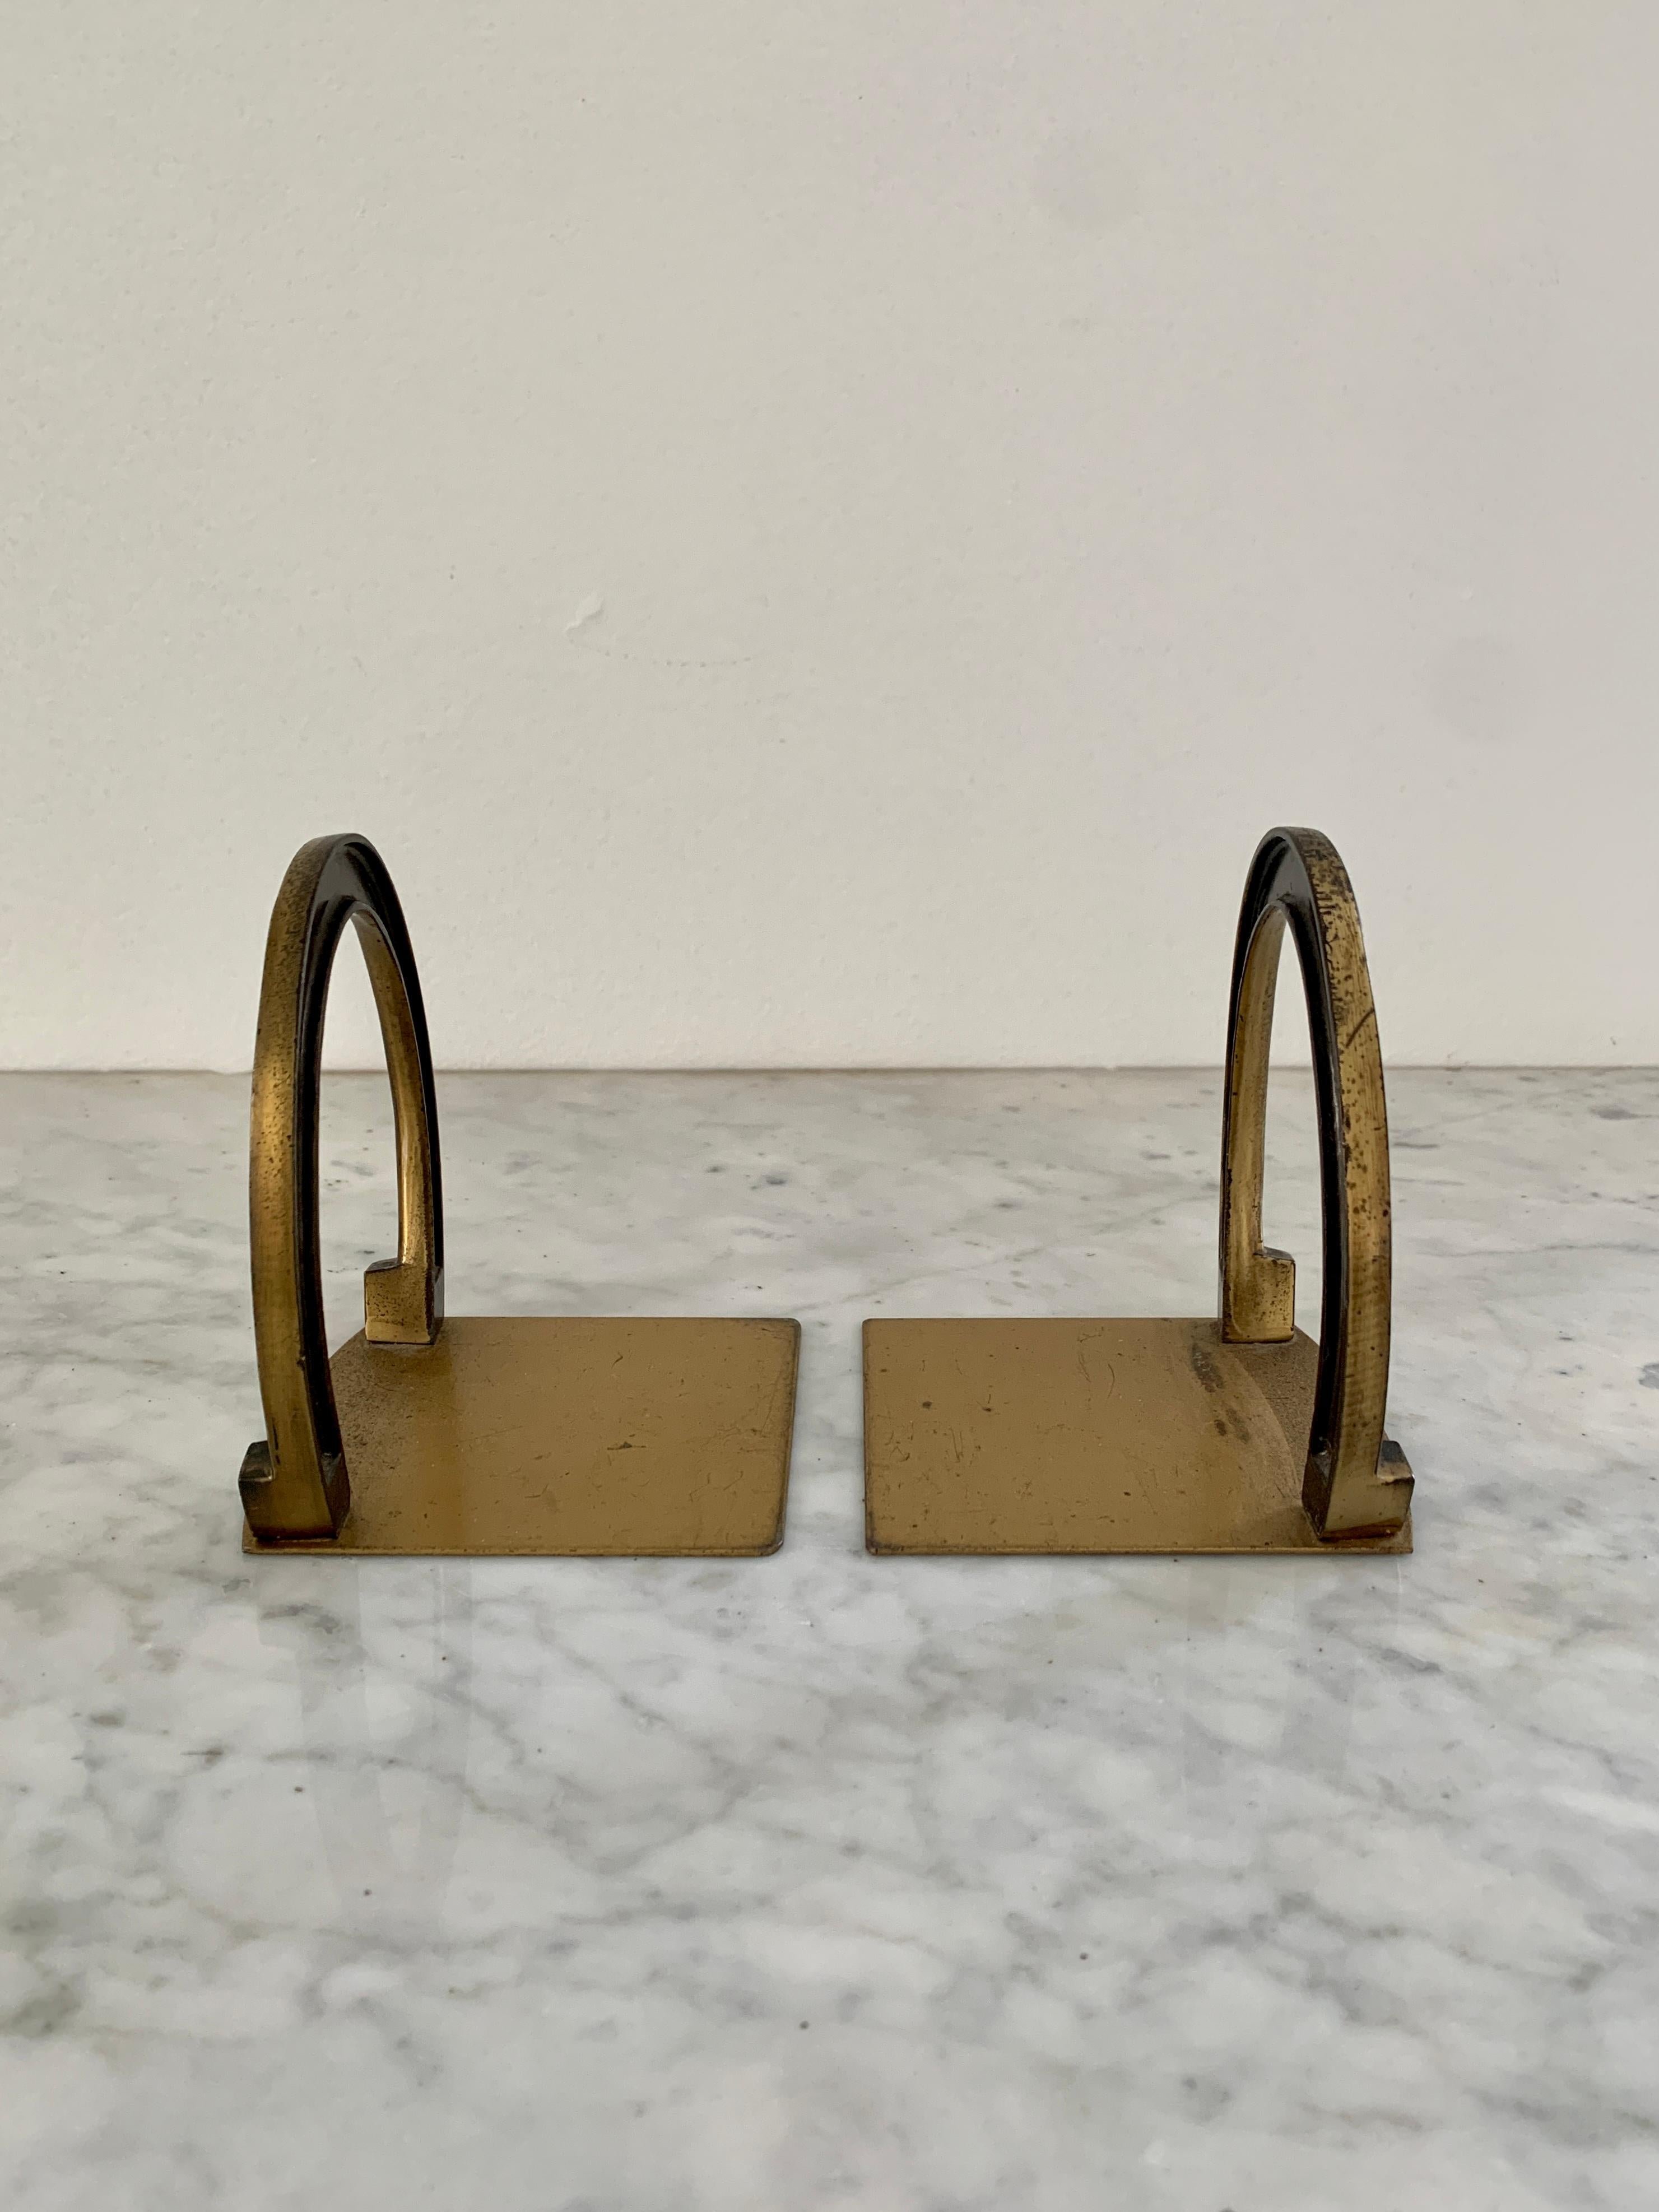 A charming pair of cast solid brass horseshoe bookends.

USA, Mid-20th Century

Measures: 4.13